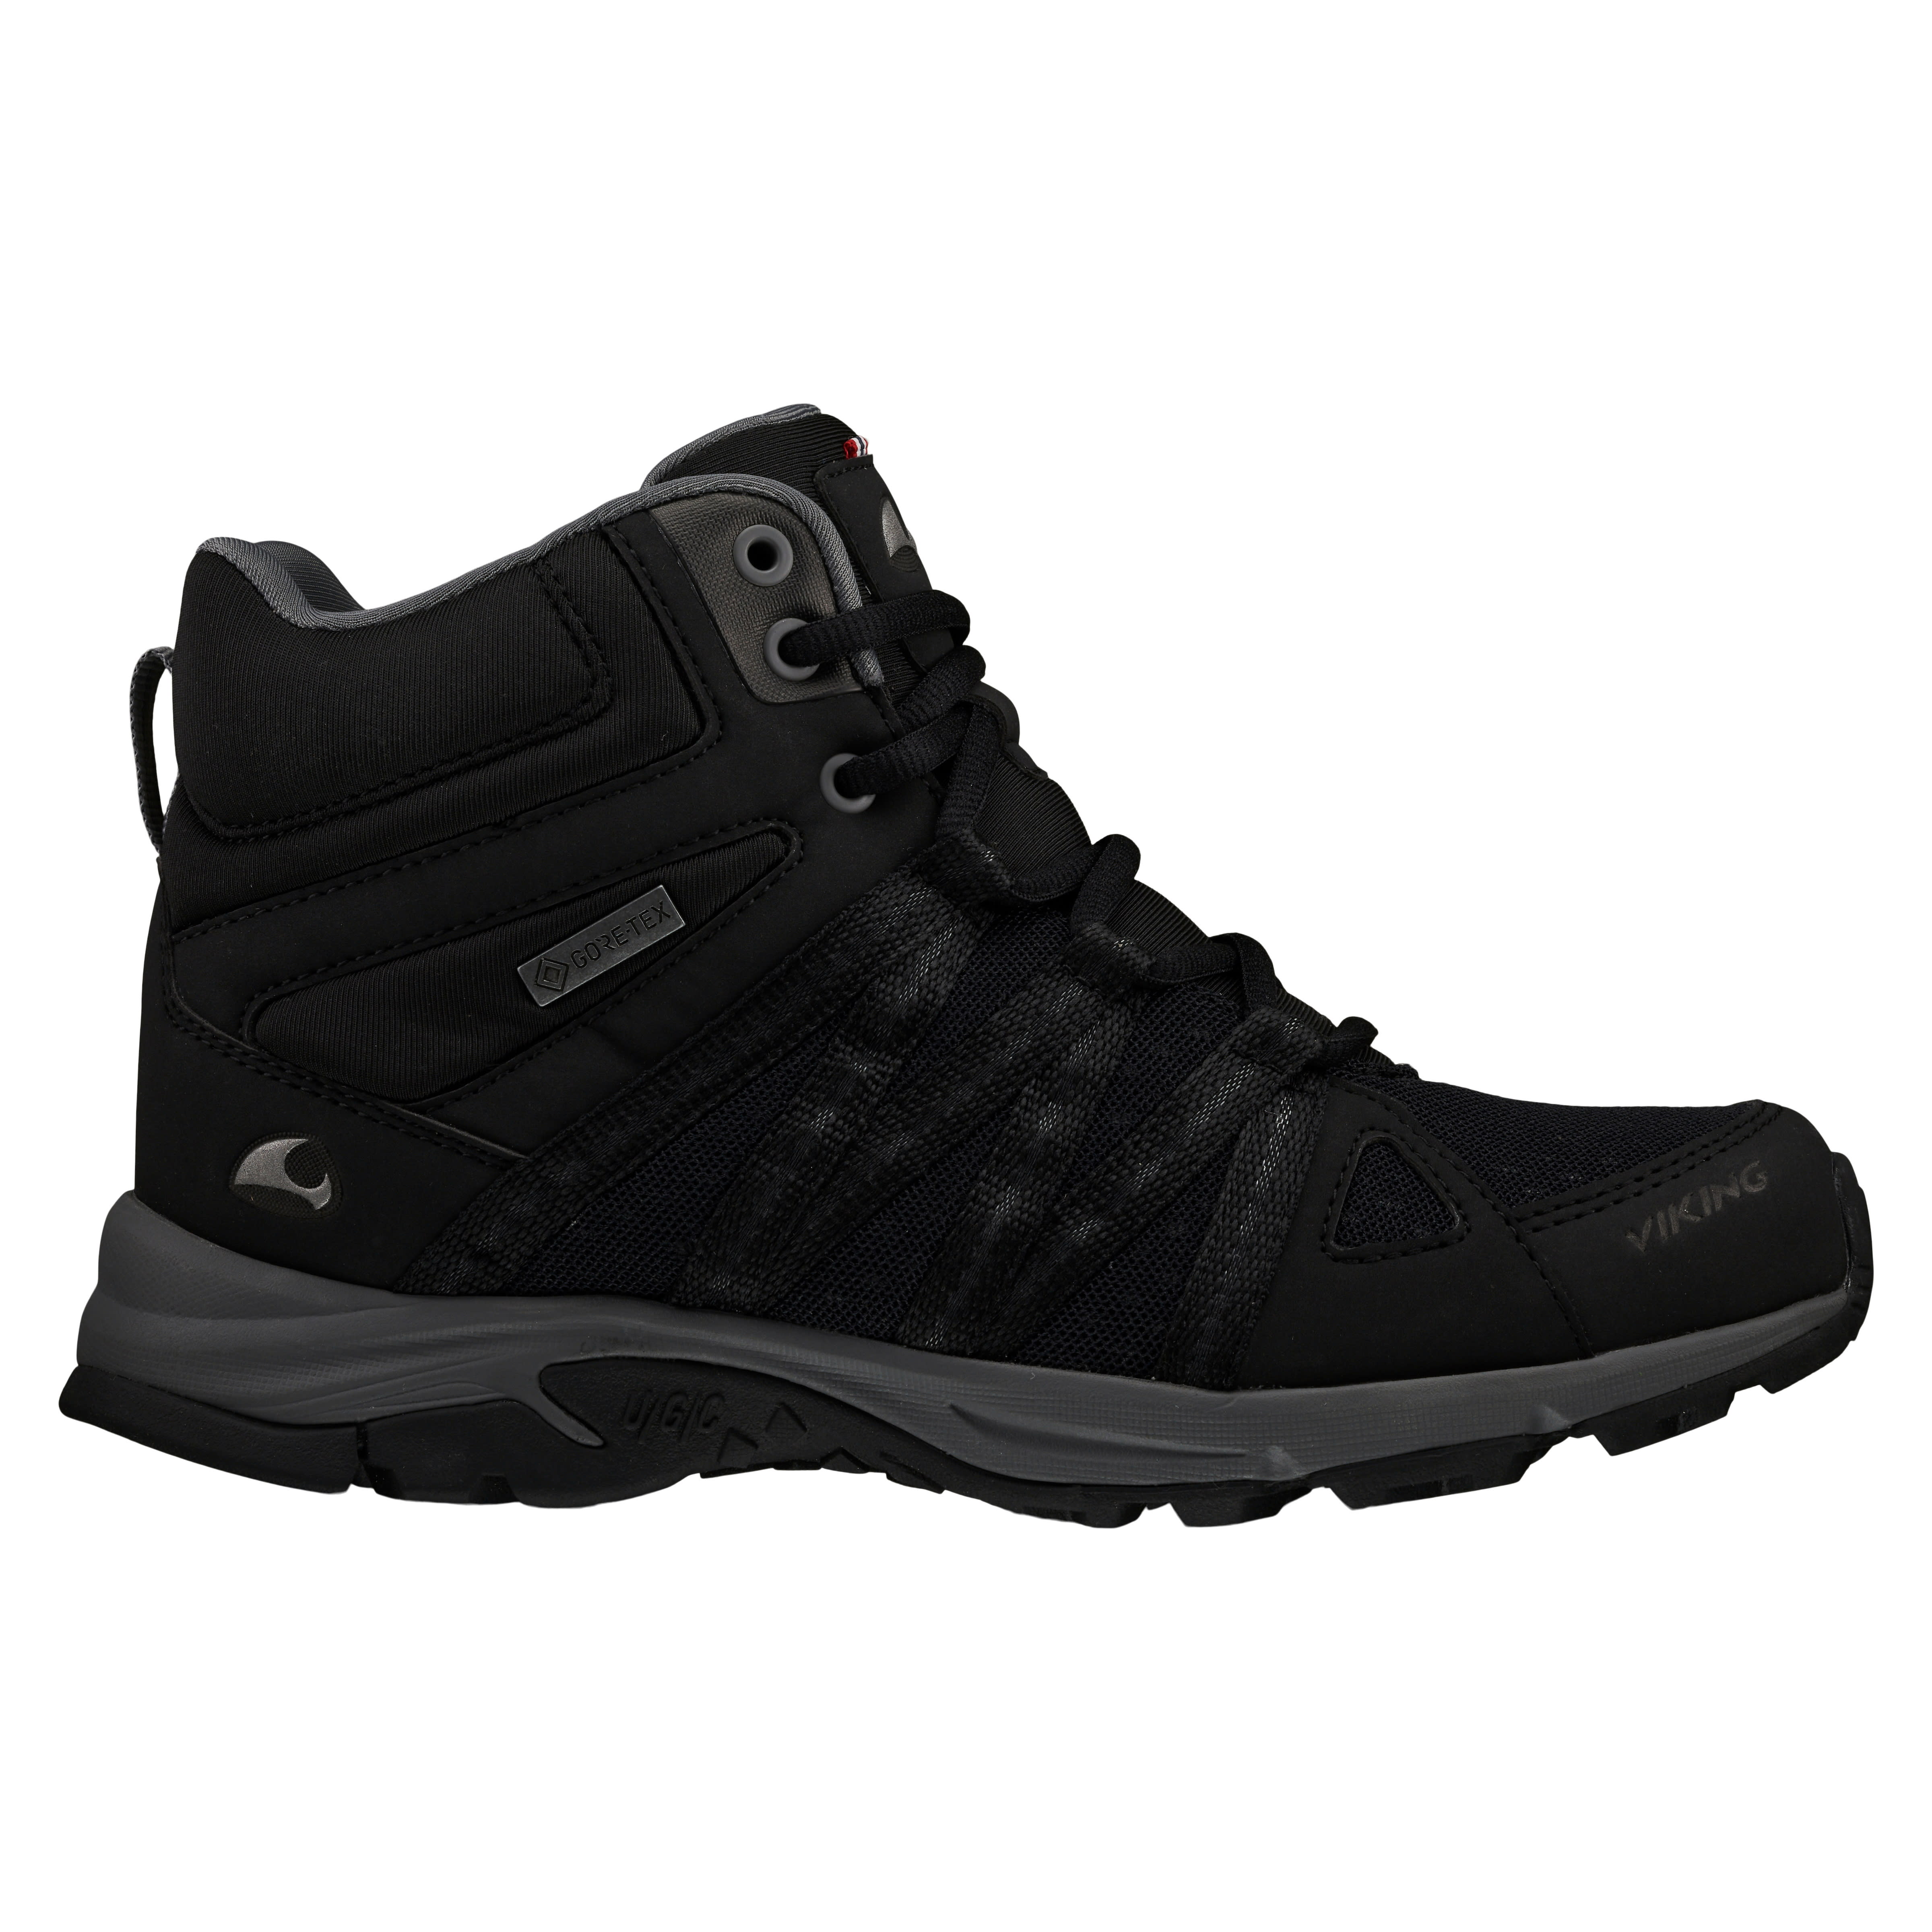 Buy Viking Footwear Men's Mid Gore-Tex from Outnorth